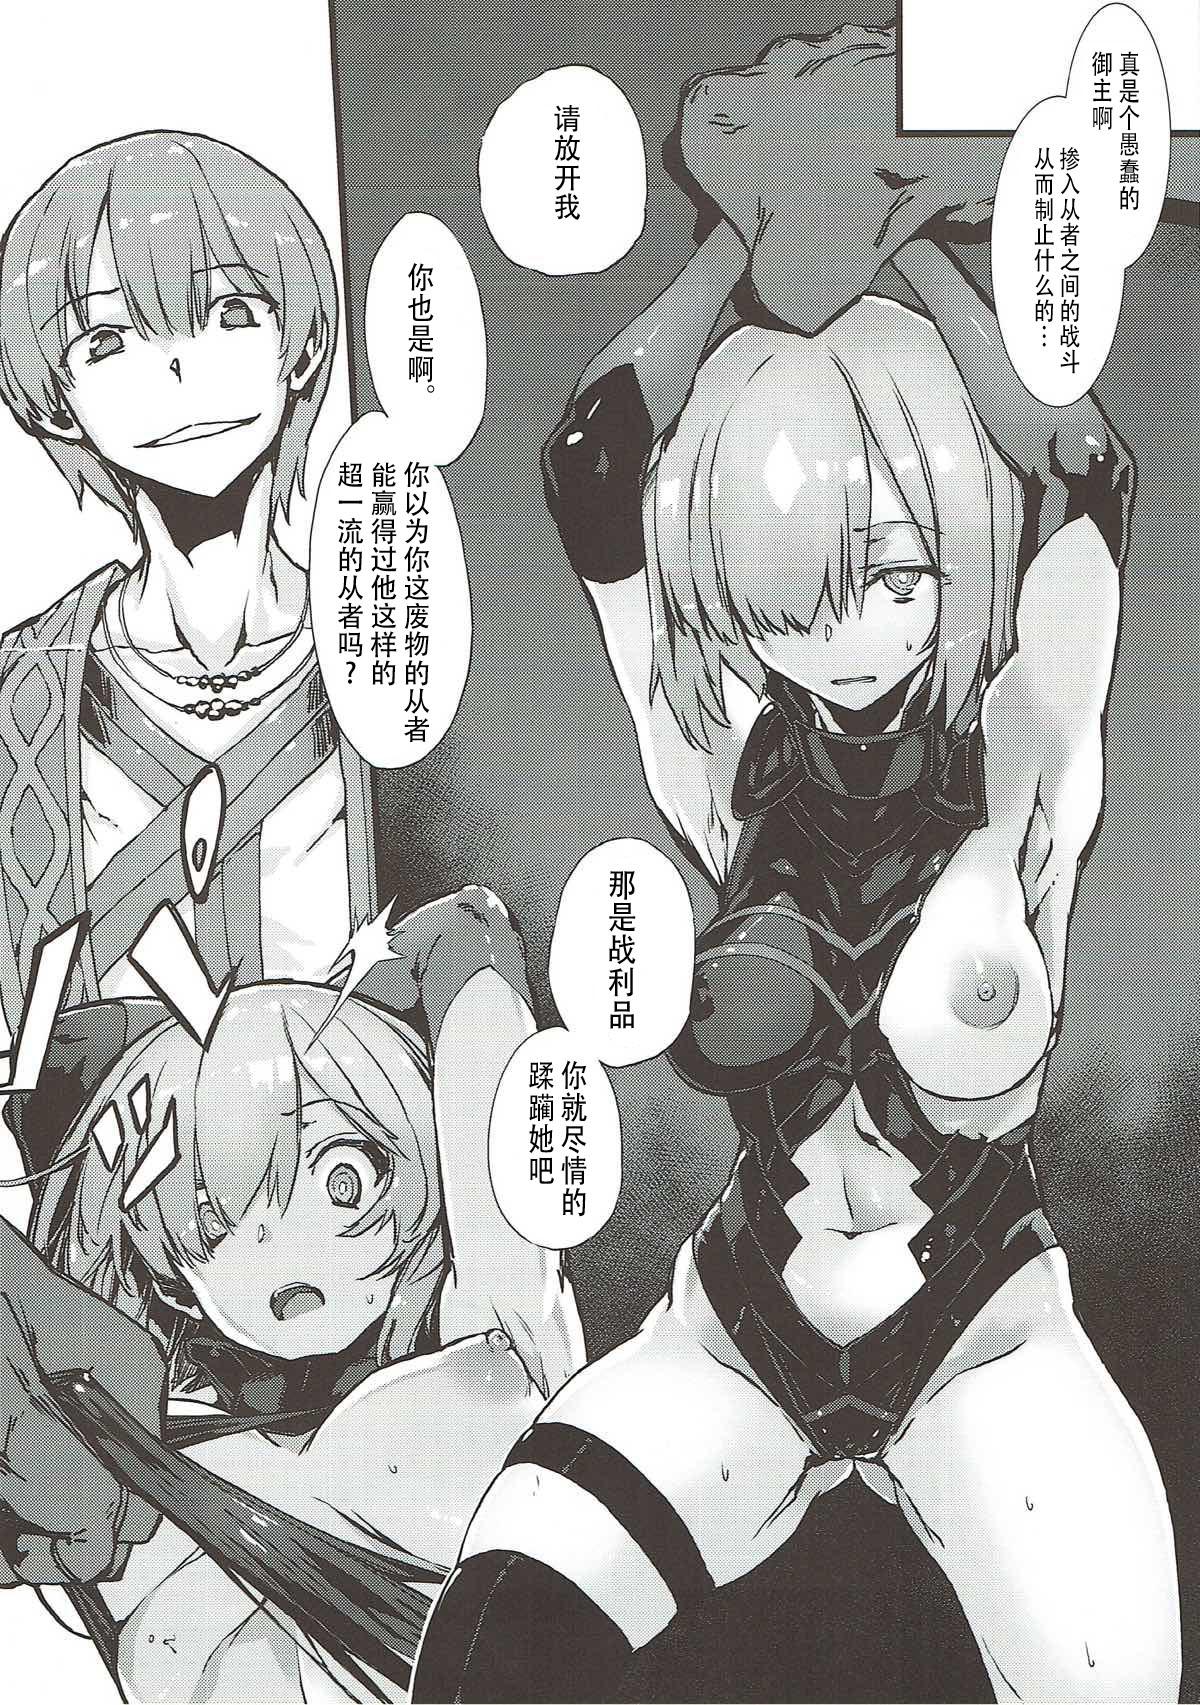 Jerking Off Bad End Catharsis Vol. 8 - Fate grand order Gonzo - Page 3